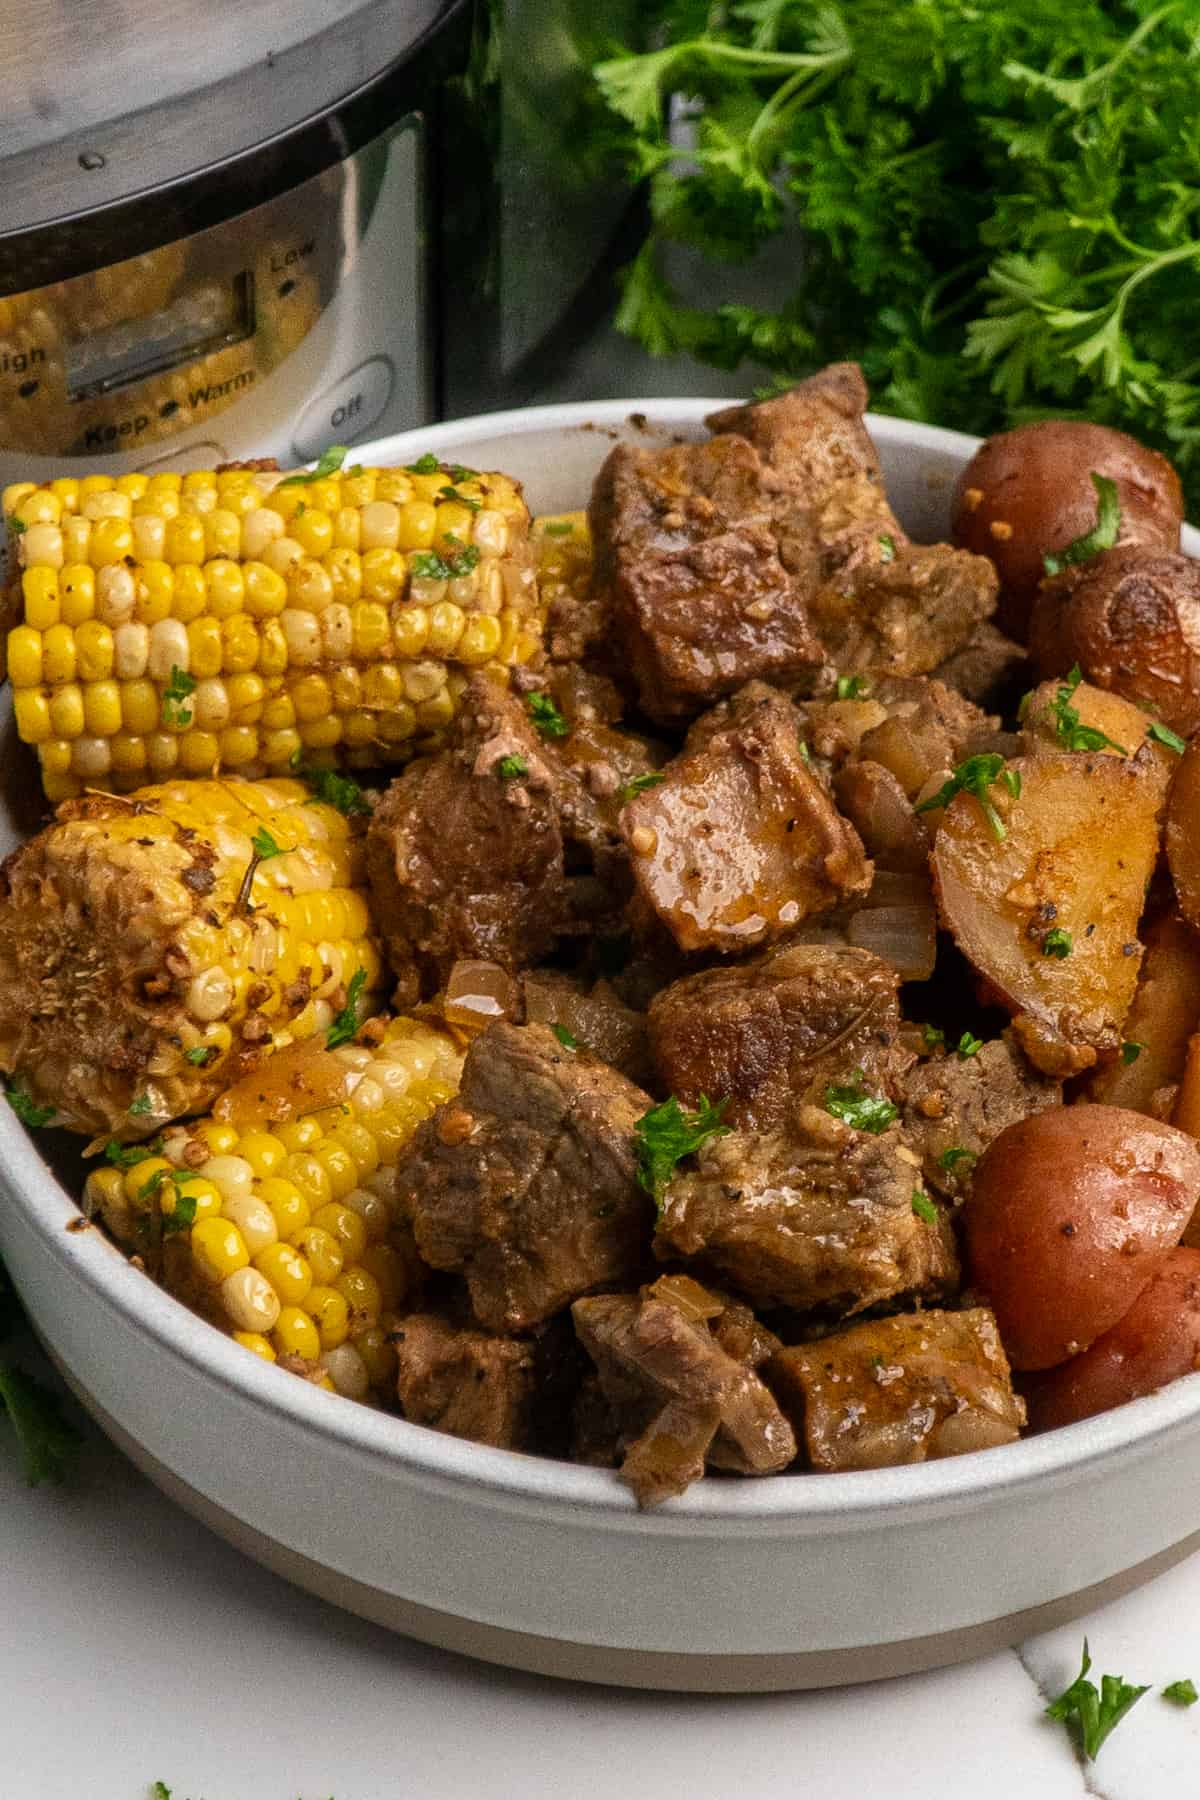 A bowl full of steak bites, corn on the cob and red potatoes.